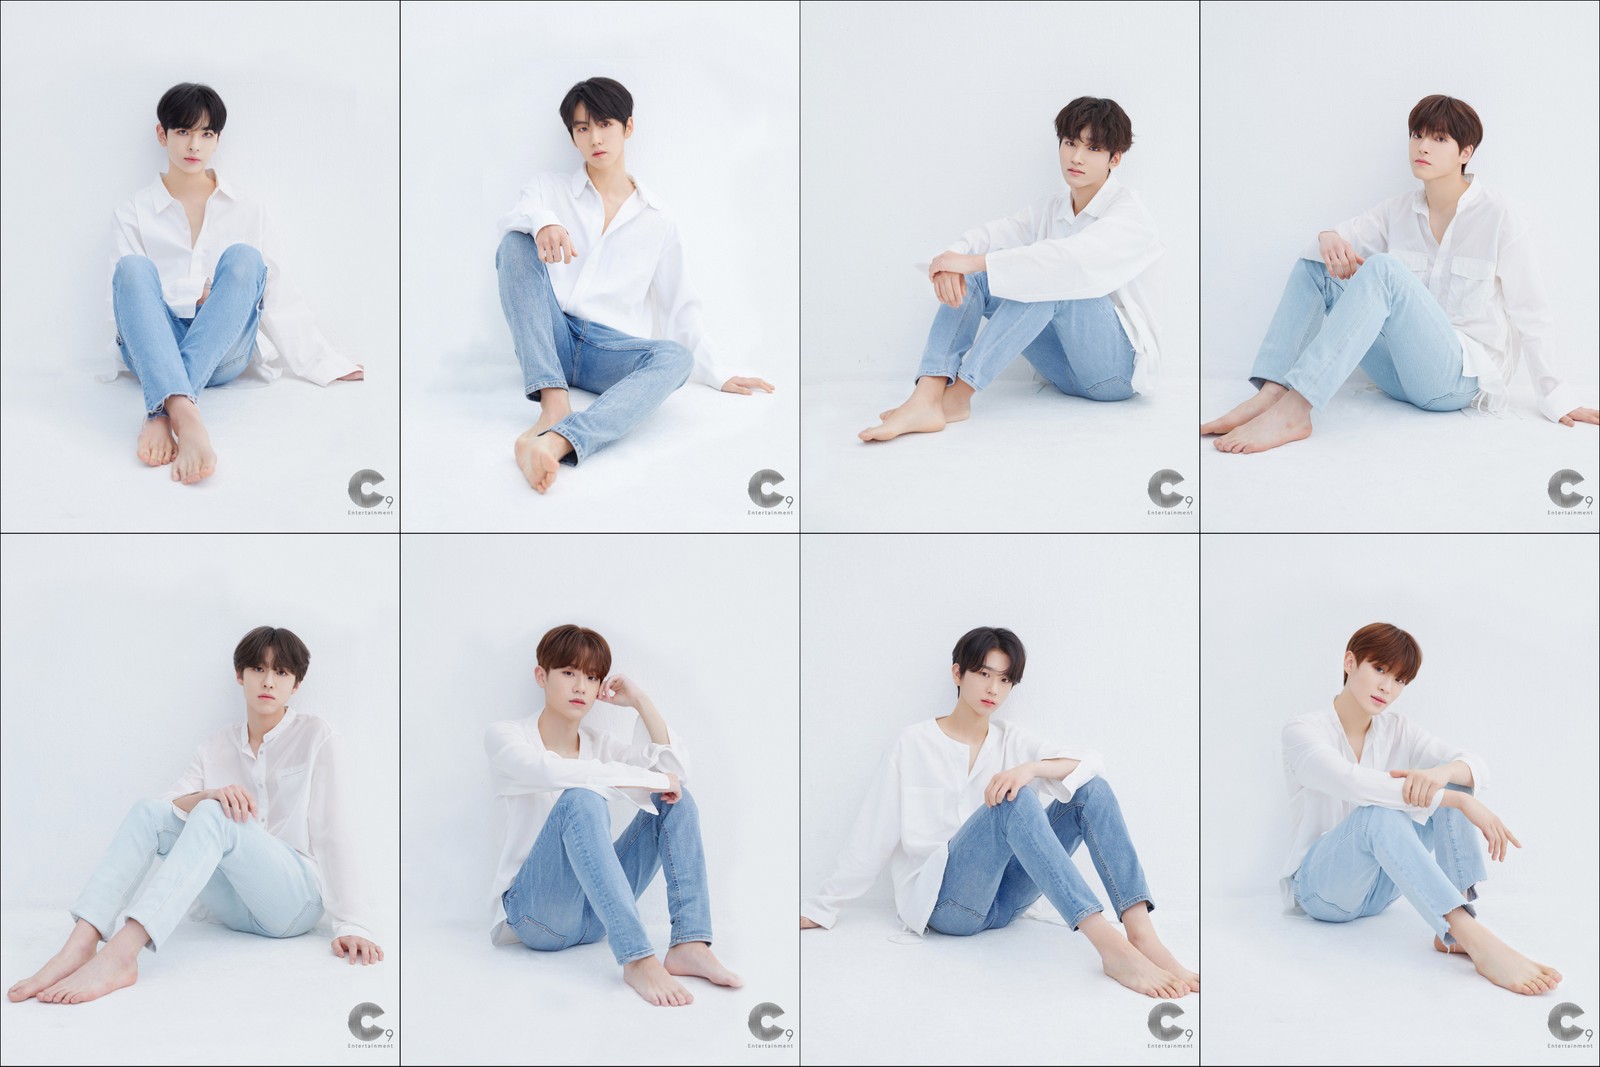 c9-entertainment-unveils-complete-member-lineup-for-new-boy-group-c9rookies